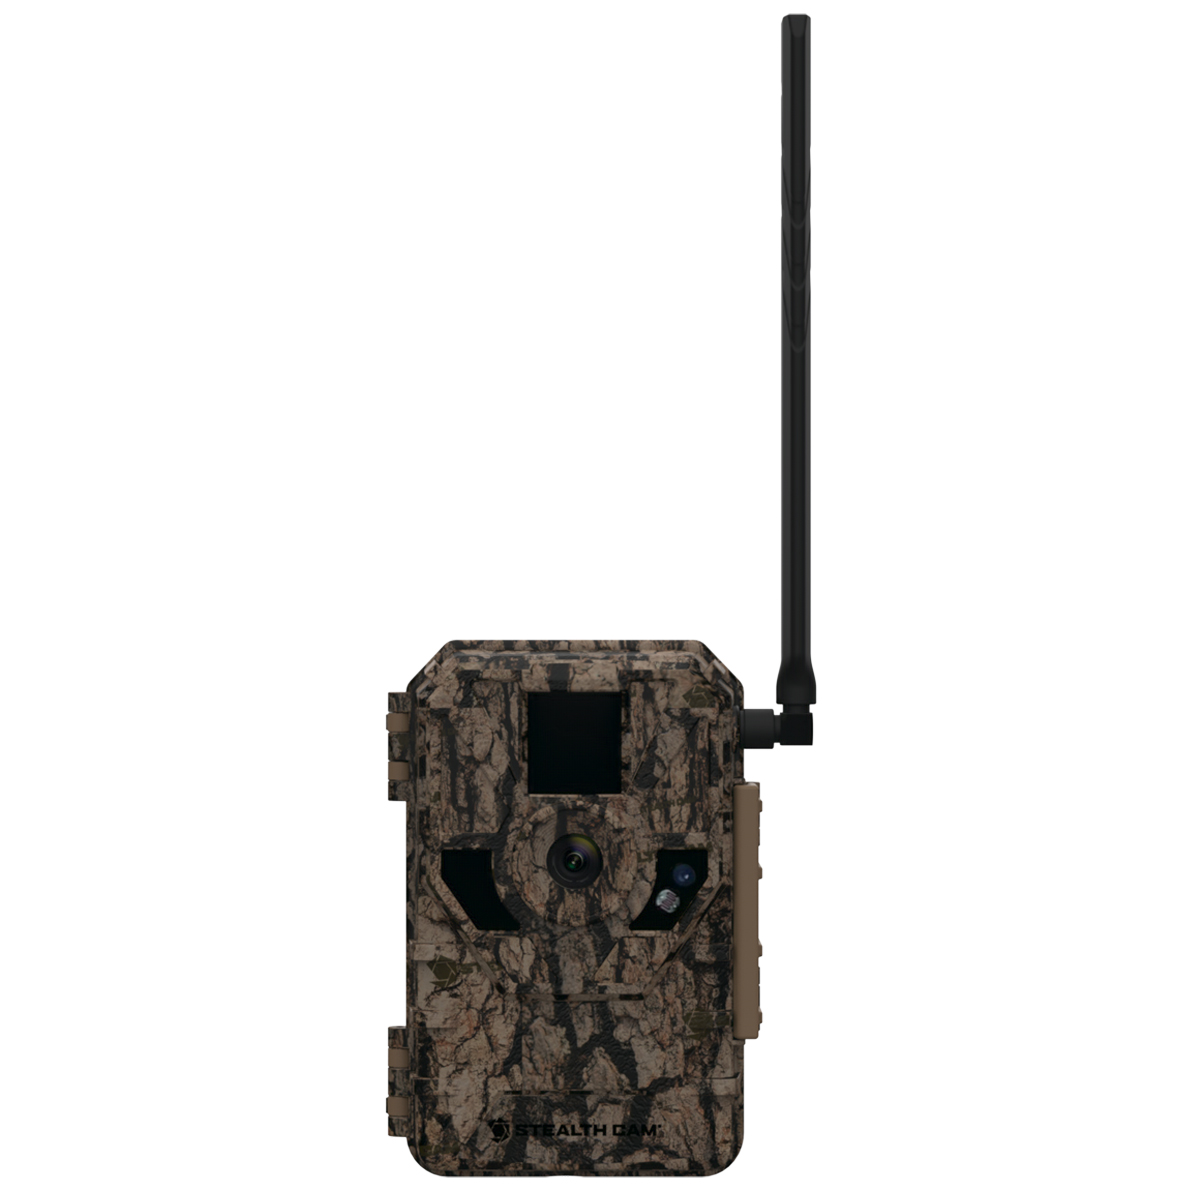 STEALTH CAM SKOUT 16MP WIRELESS TRAIL CAMERA - NEW Photo